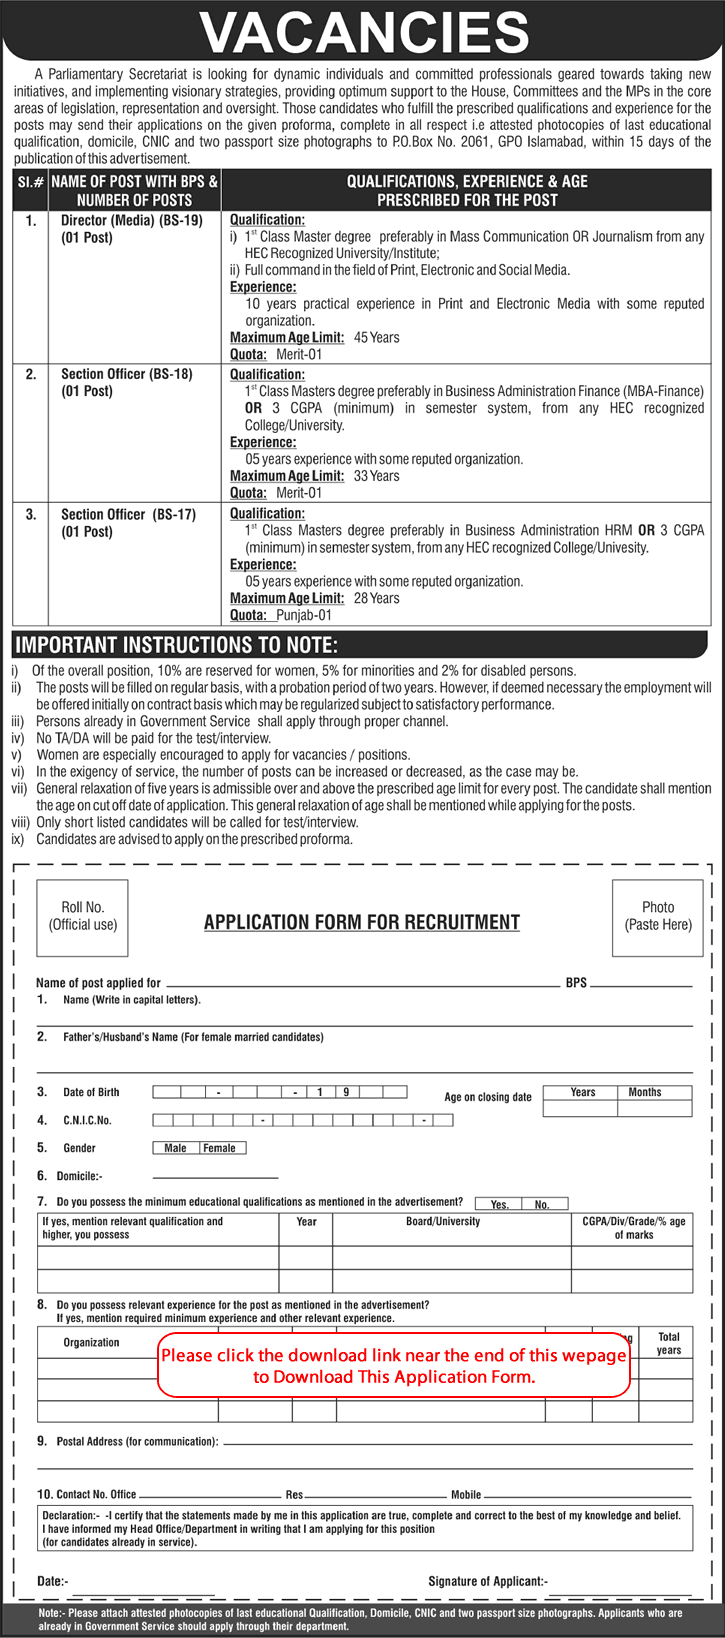 PO Box 2061 Islamabad Jobs 2015 February Application Form Download Section Officers & Media Director